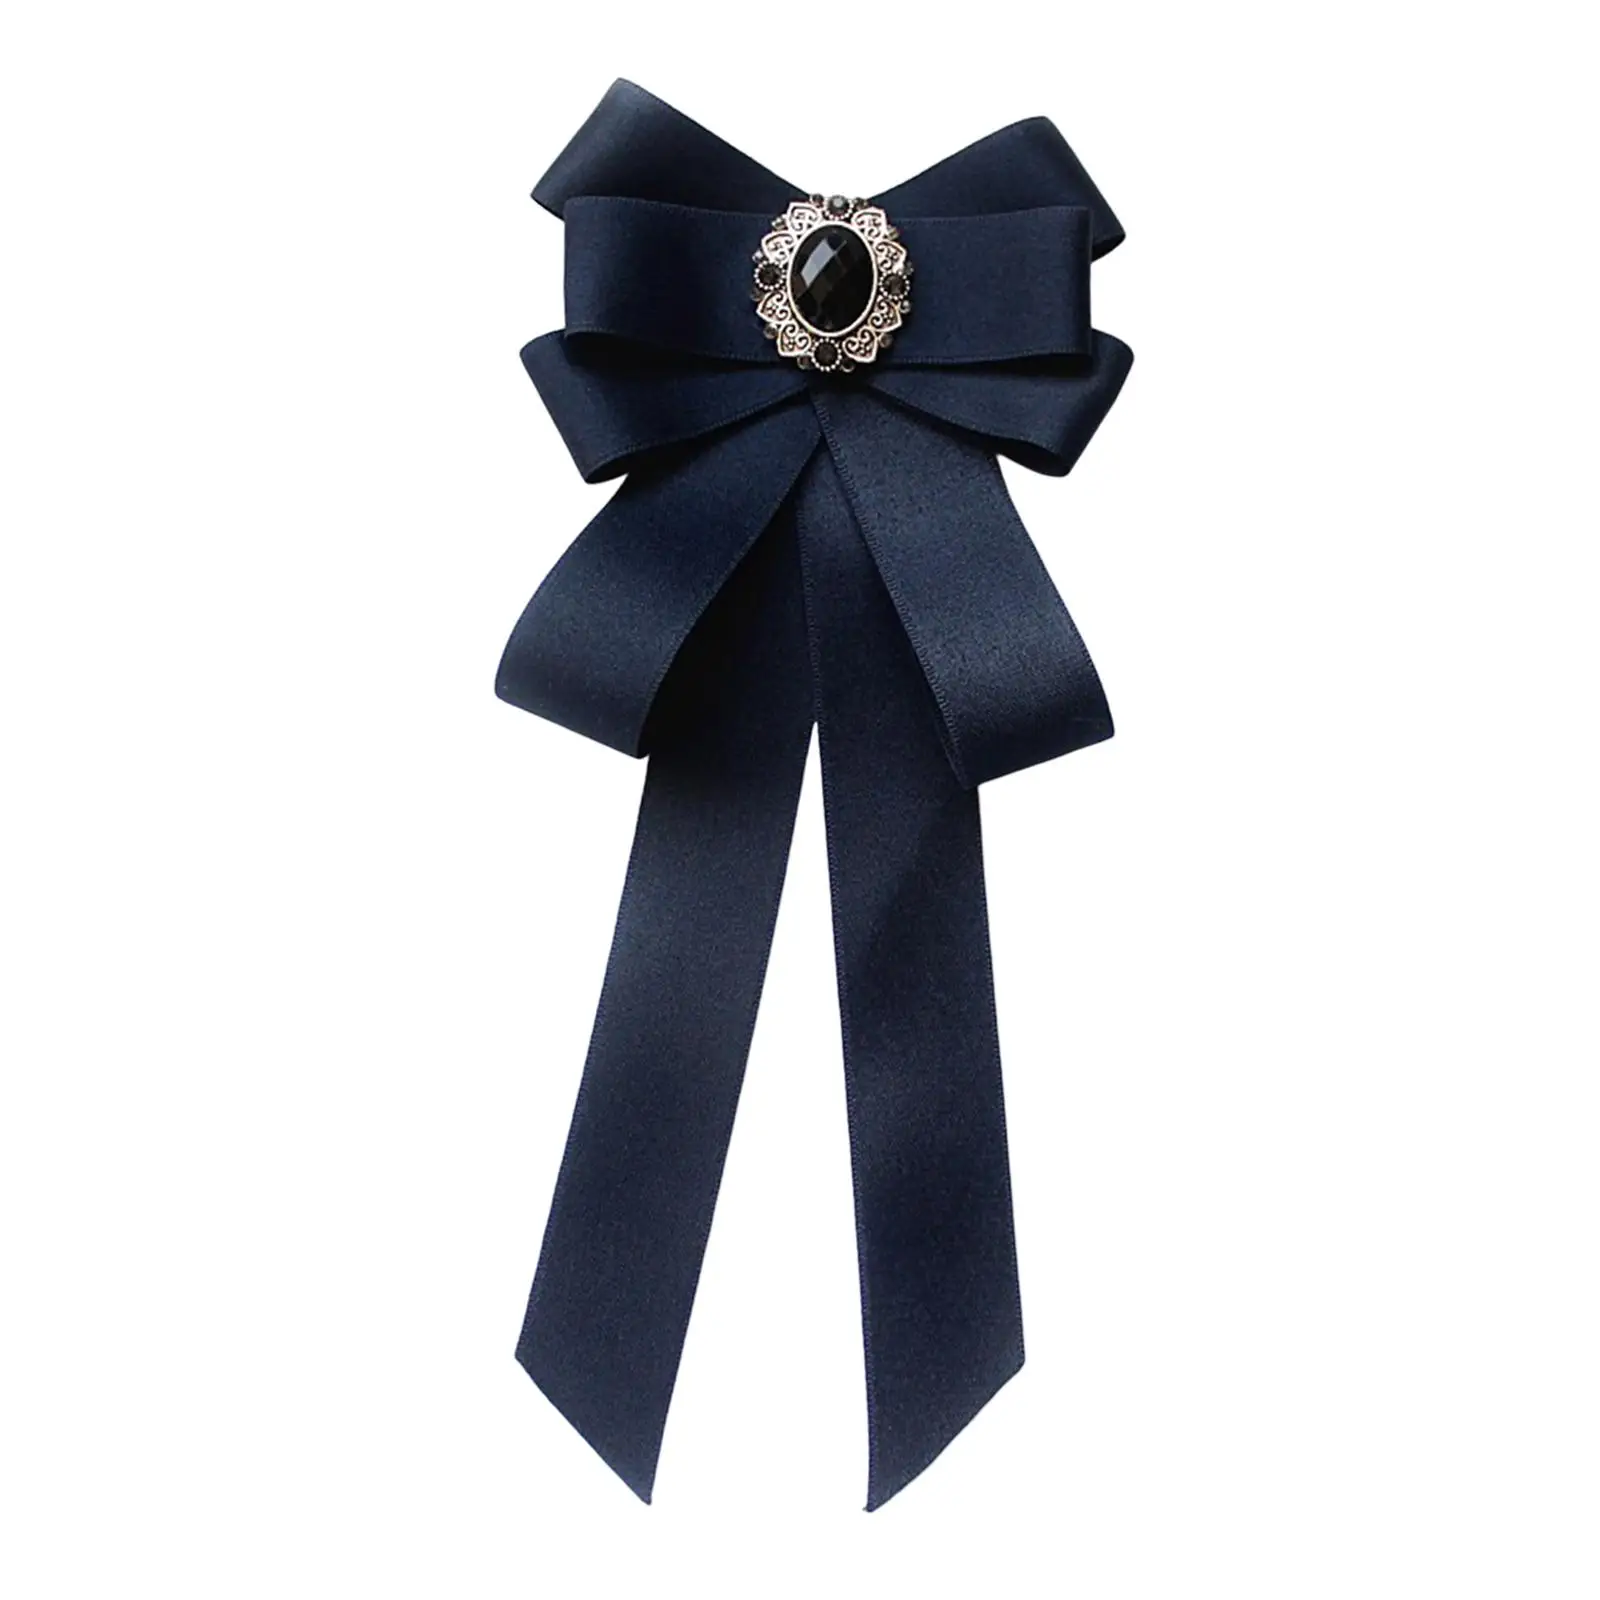 Women' Tied Bowknot Decoration Necklace Ladies Girls Ribbon Brooch for Party Holiday Wedding Costume Accessory Office